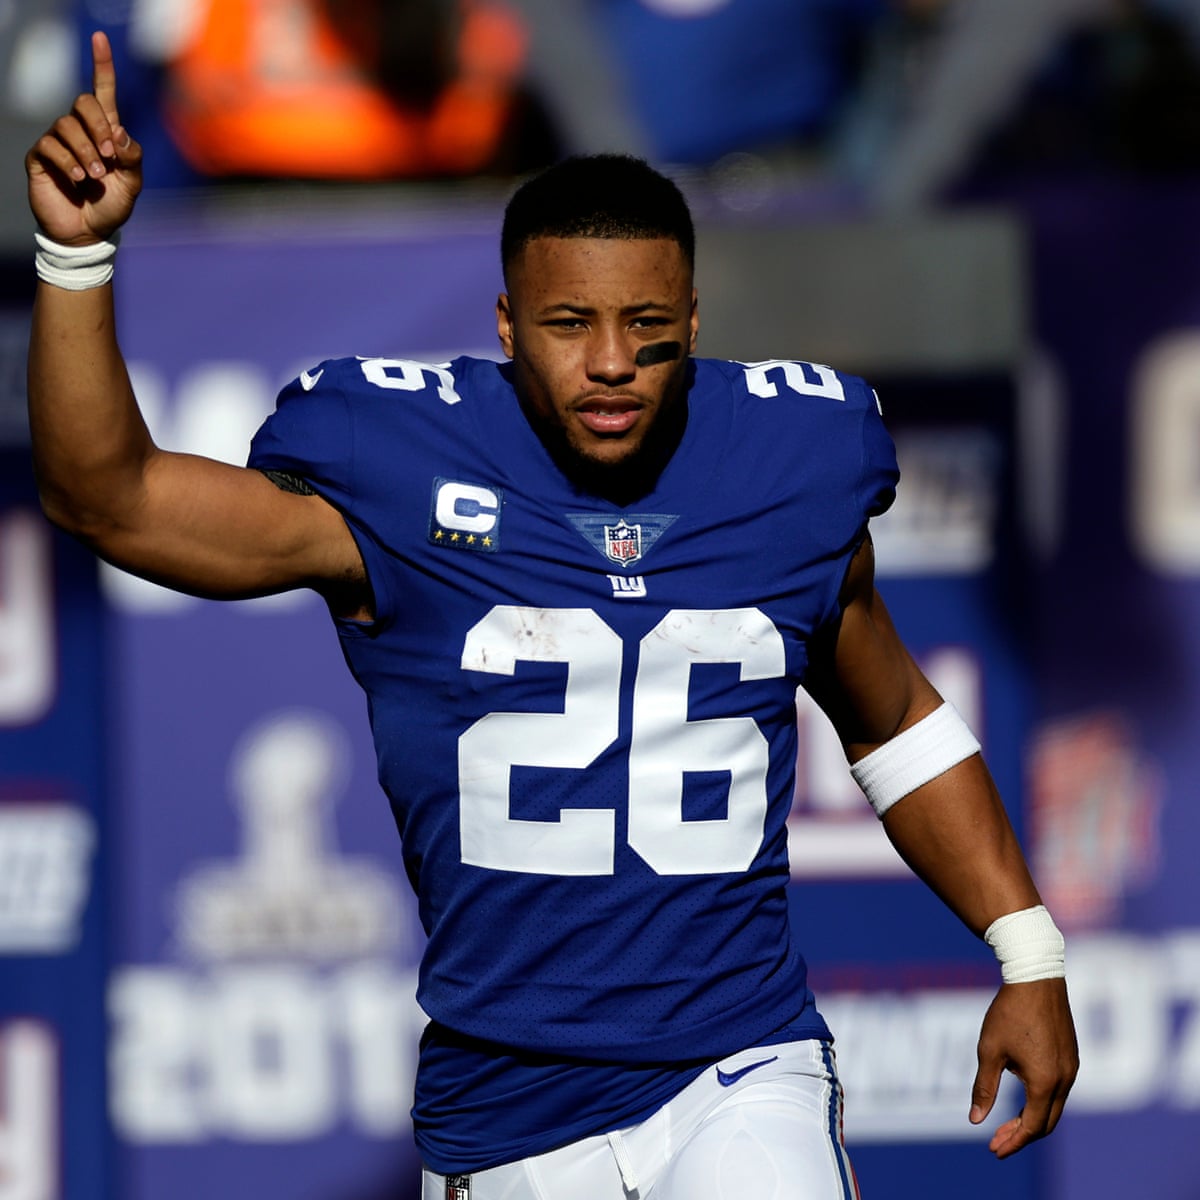 NFL running backs are angry – and peace seems a long way off, NFL